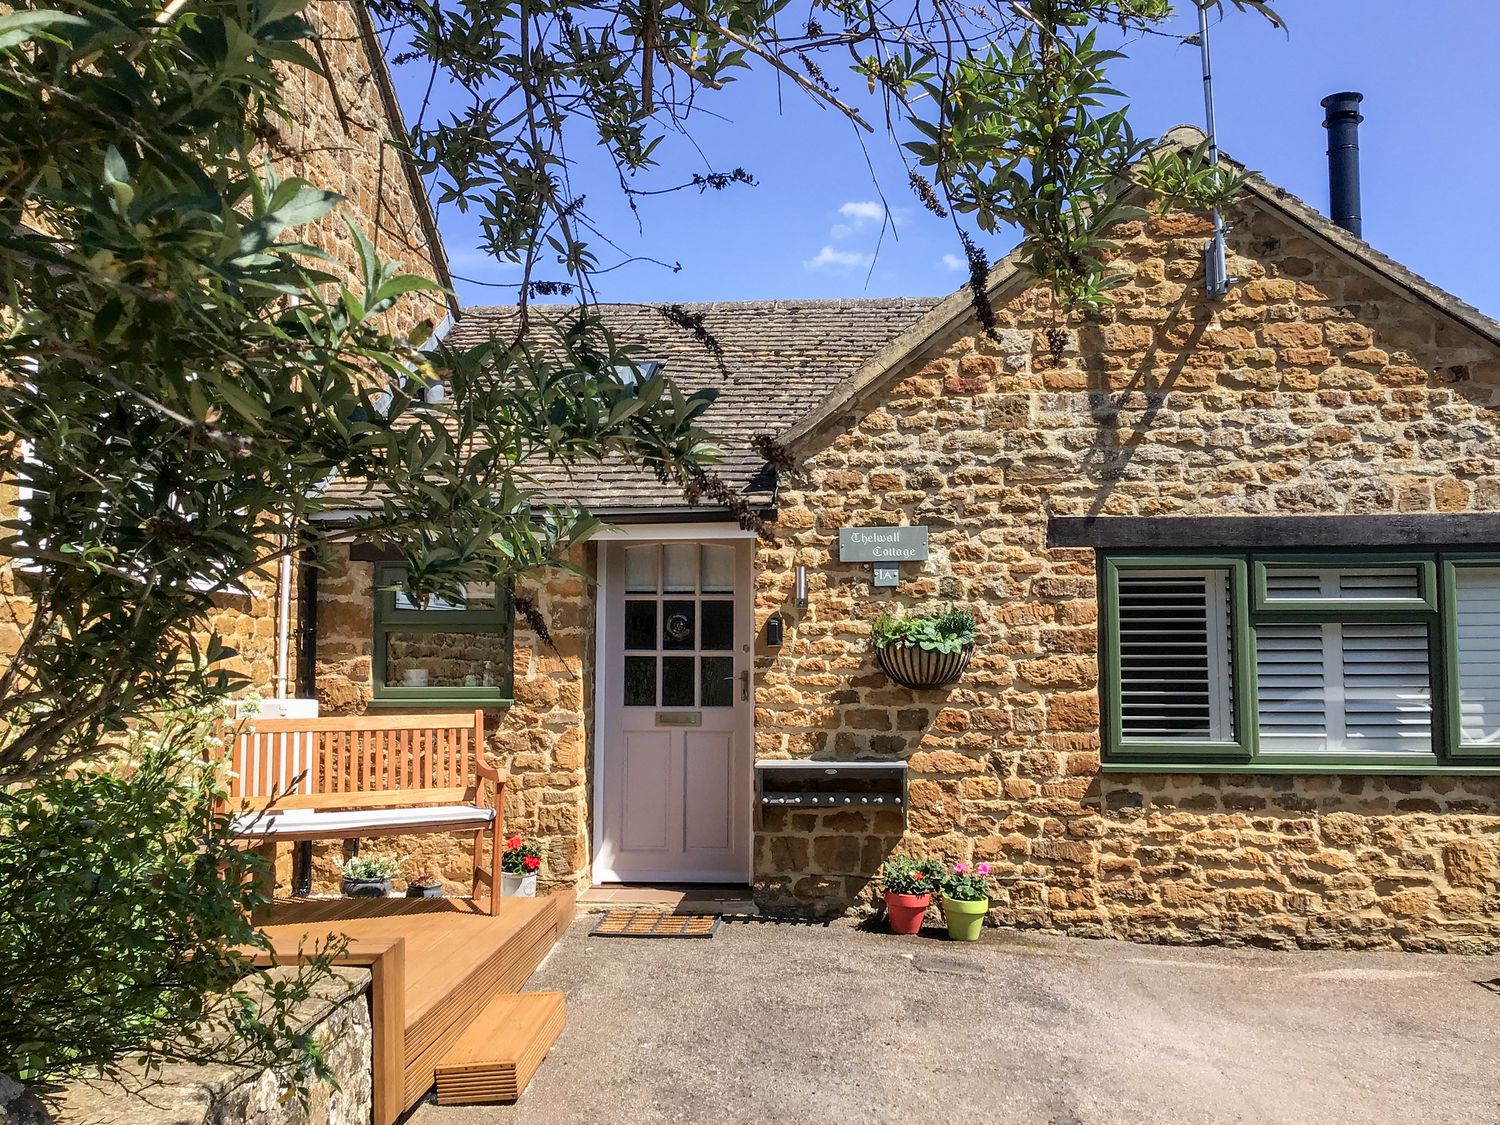 Thelwall Cottage - Cotswolds - 1059888 - photo 1